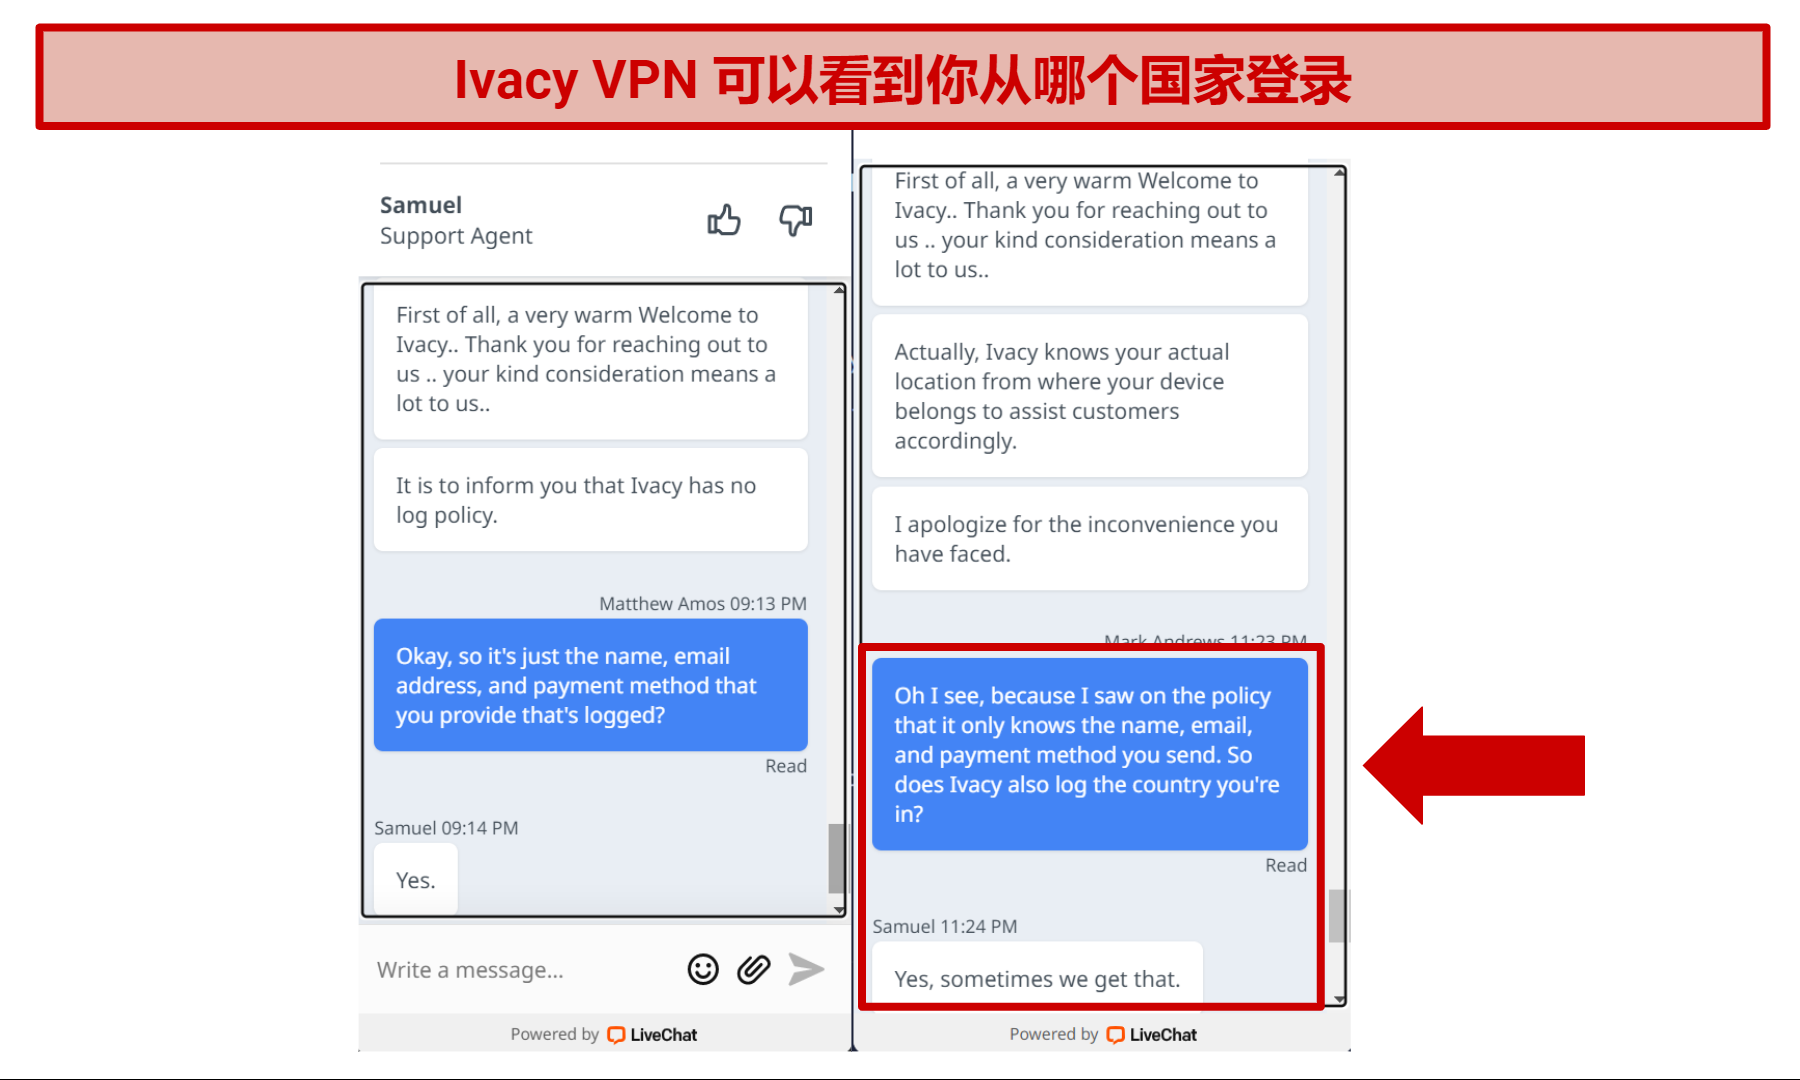 Screenshot of Ivacy VPN live chat where staff confirmed it logs your country